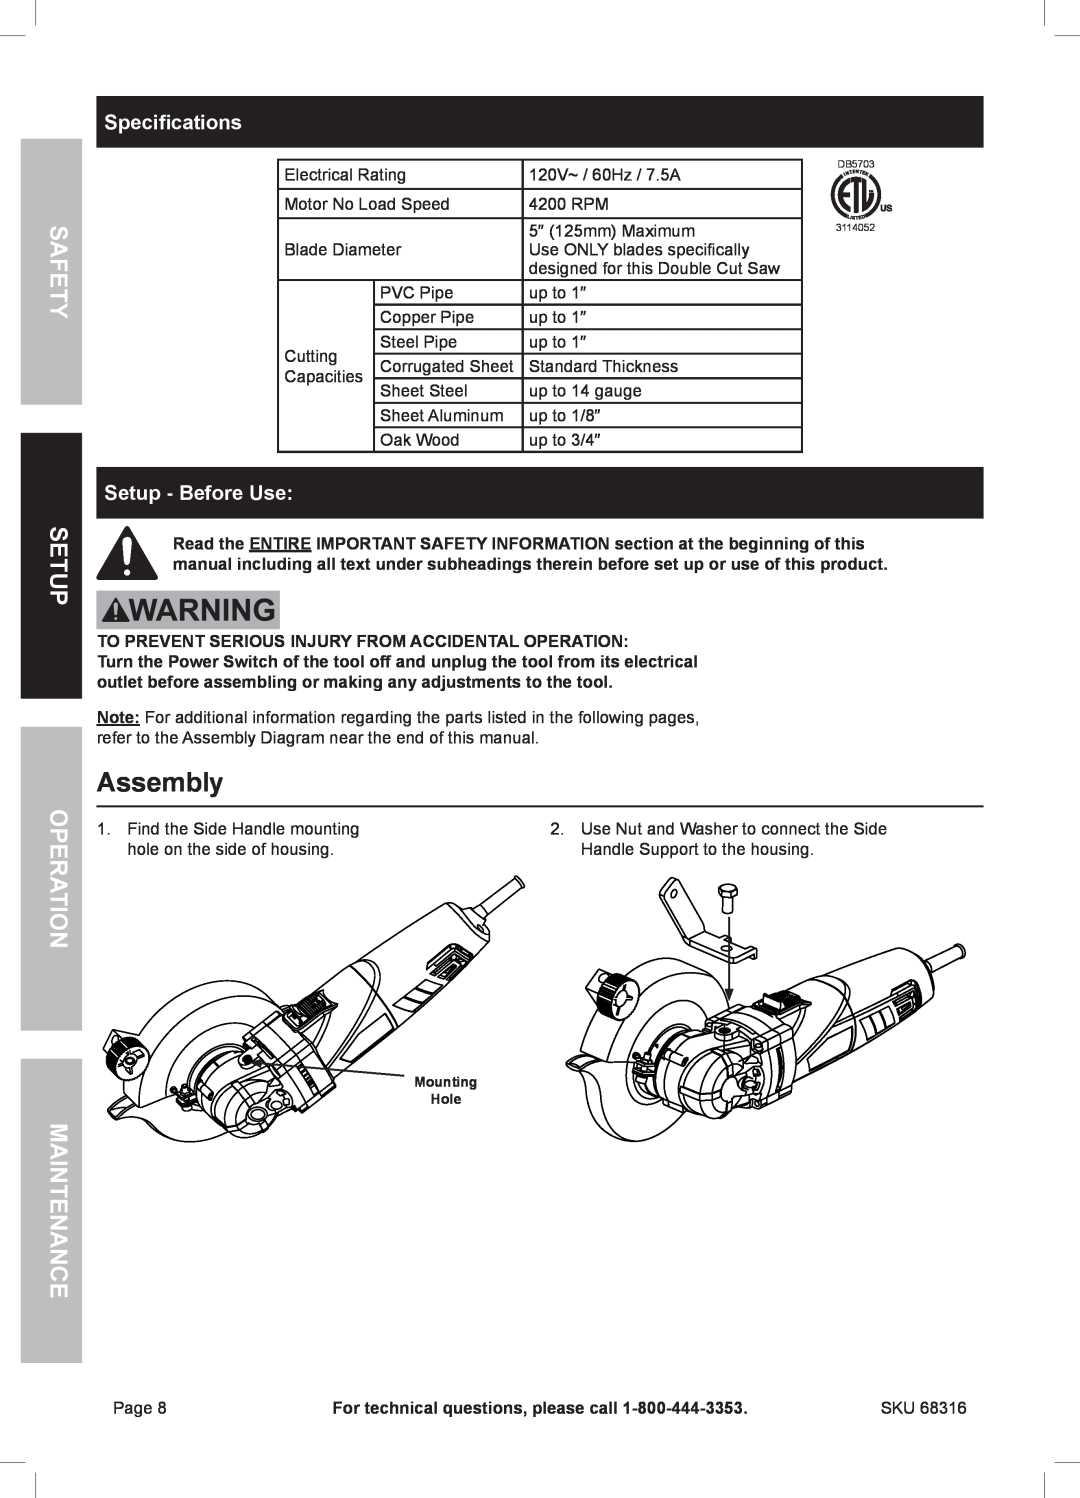 Chicago Electric 68316 owner manual Assembly, Safety Setup Operation, Specifications, Setup - Before Use, Maintenance 